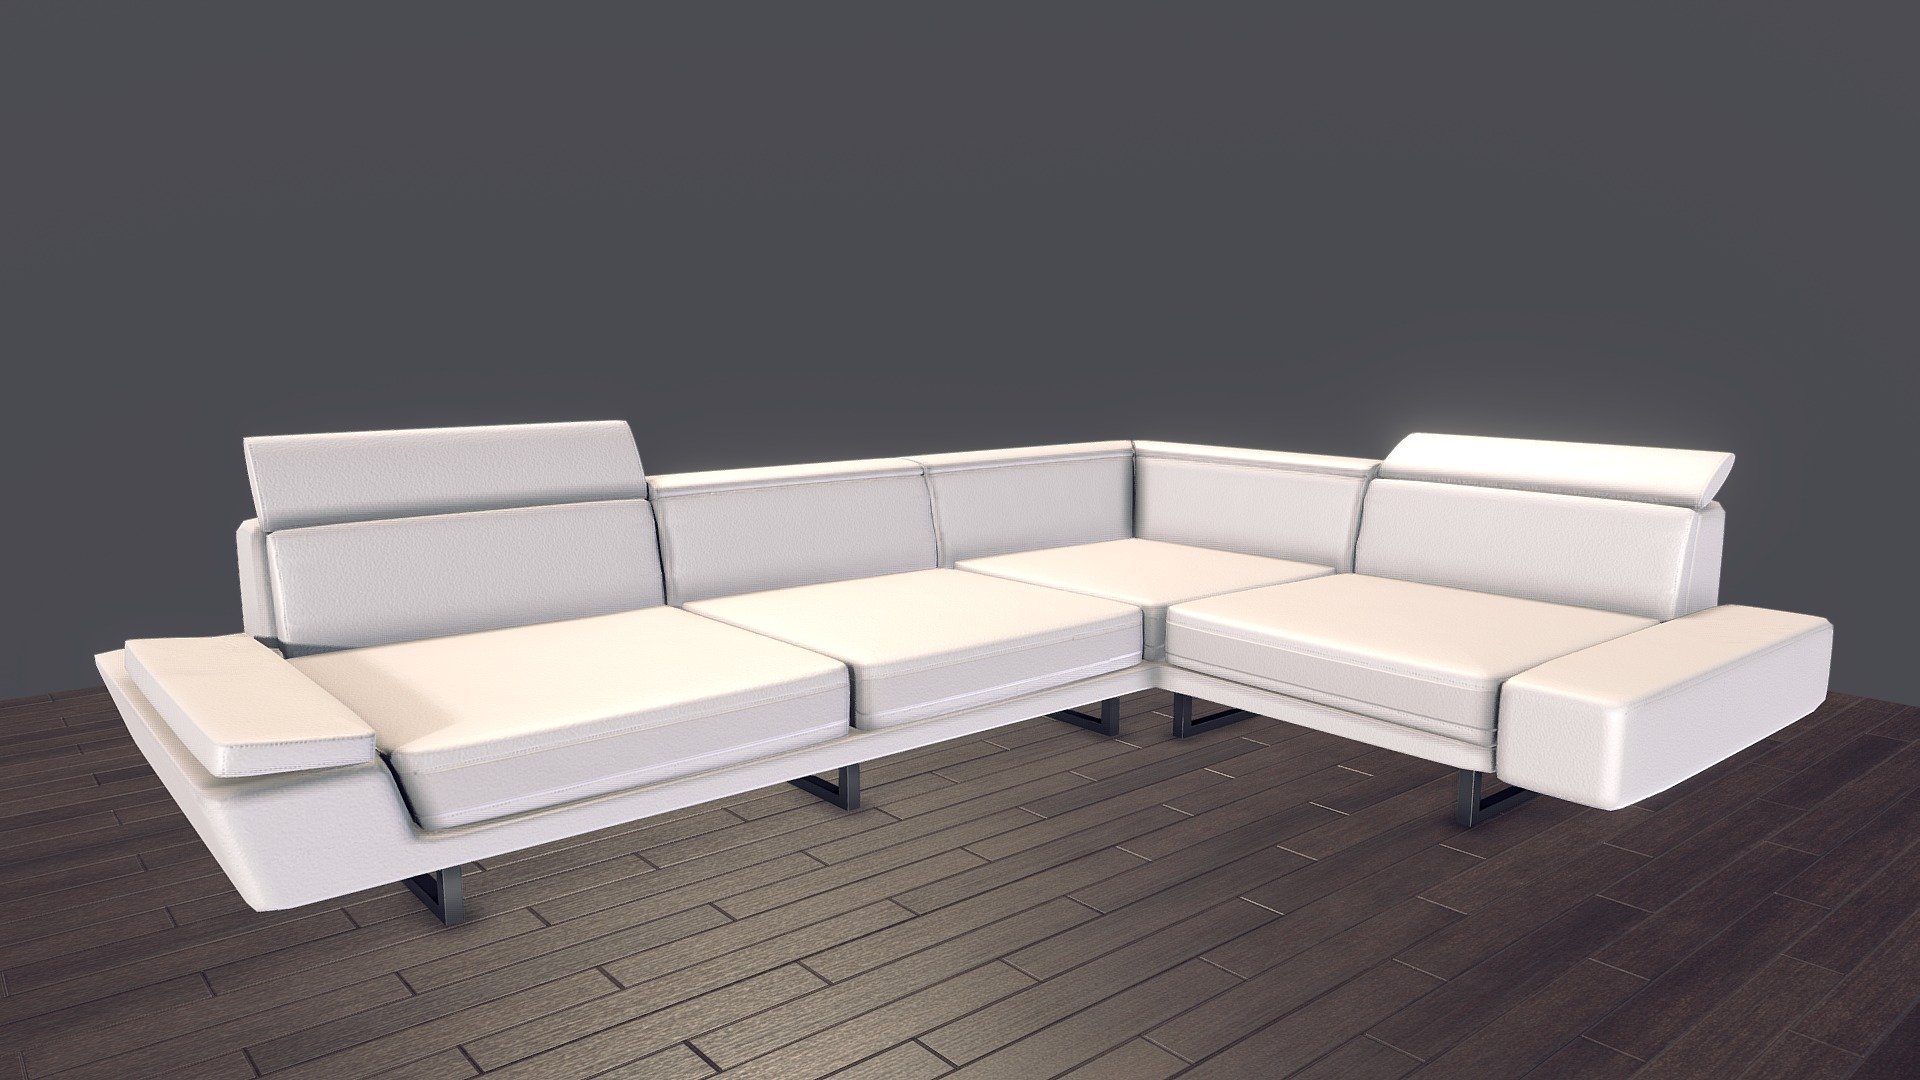 For my followers, sorry I have been away. working on stuff.

Anyway I'm working on a new scene, this time featuring a modern home. It's coming along, but until thats out and I release a pack heres the main centerpiece of the model, the couch. (Technically Game Ready)

what that means is that it's game ready, but because I'm using it for cinematics I didnt bother cleaning up typology. Sorry bout that.

Like always the model and all textures are available to download 3d model